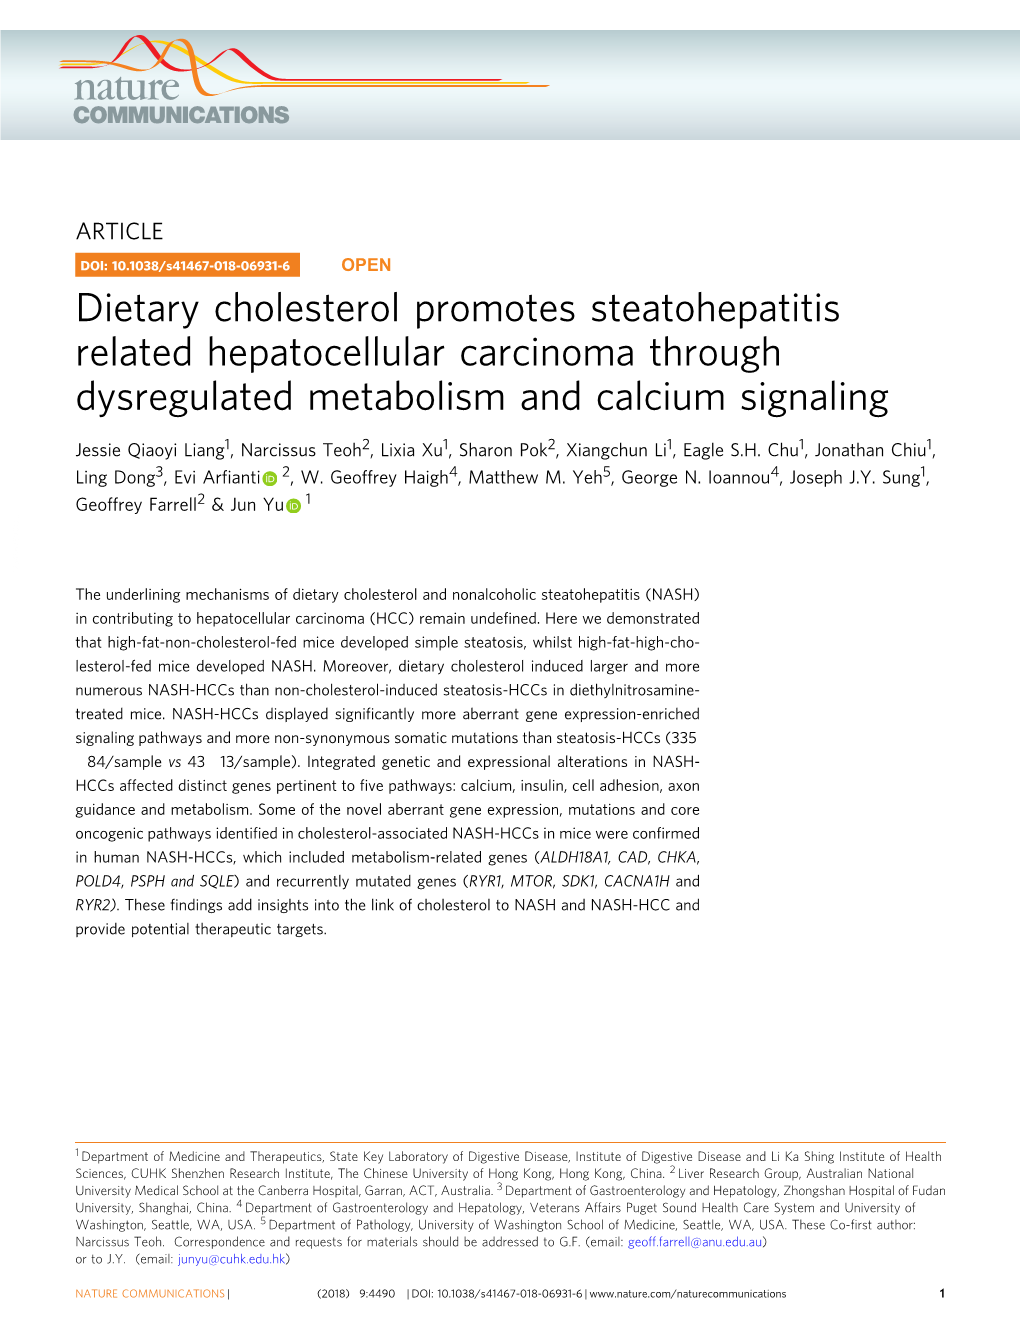 Dietary Cholesterol Promotes Steatohepatitis Related Hepatocellular Carcinoma Through Dysregulated Metabolism and Calcium Signaling